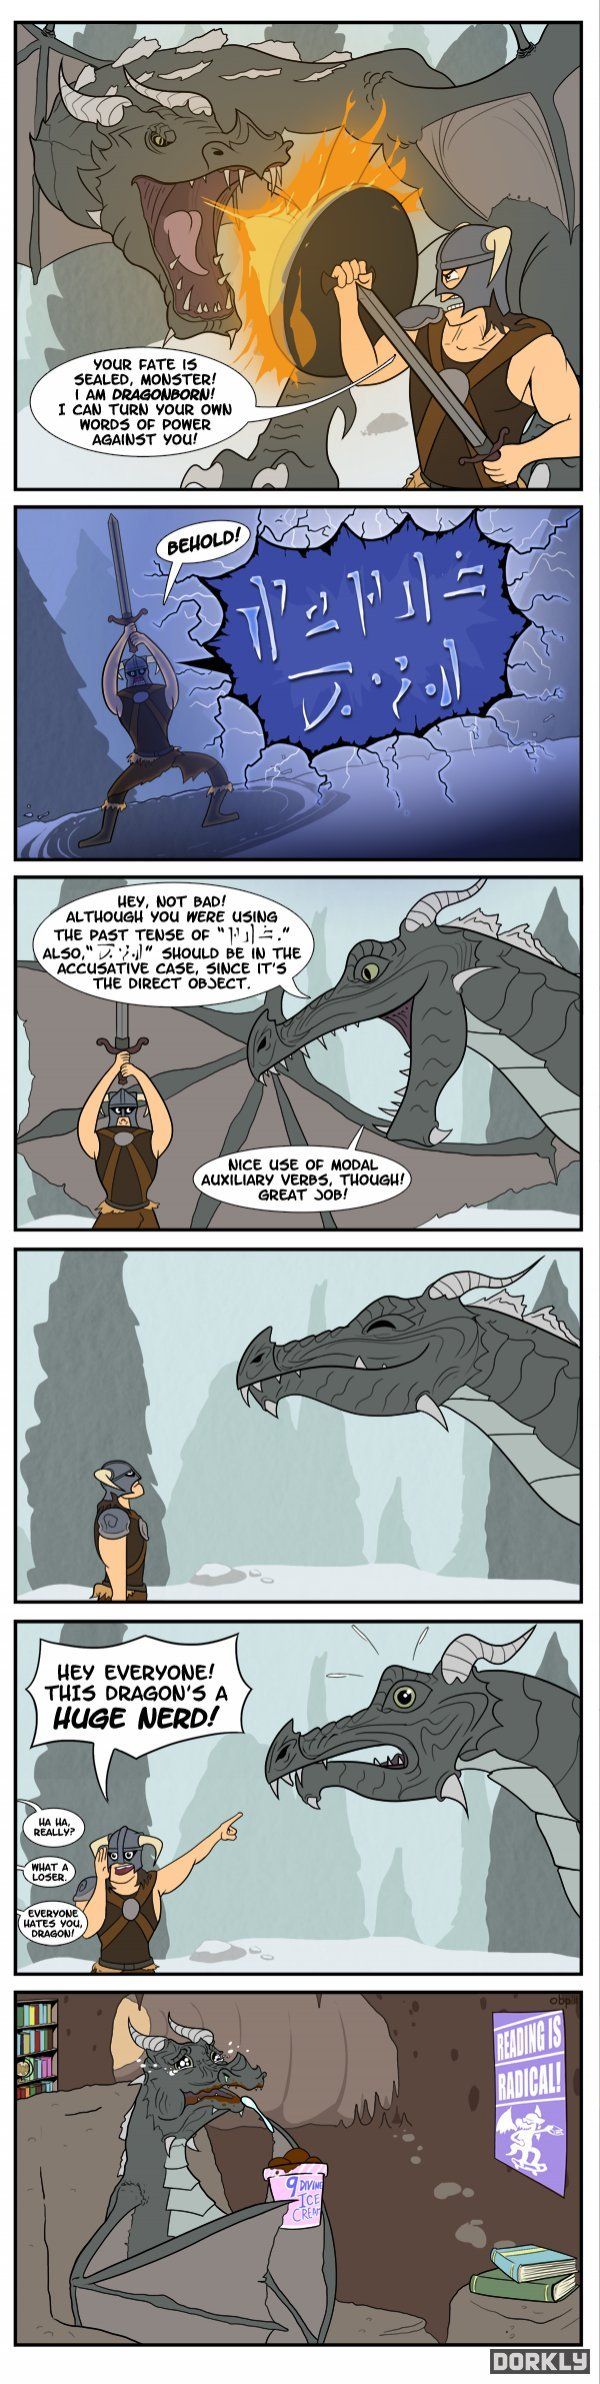 Let this be the comment for learning a language "of dragons" and speaking only in dragon or not at all.